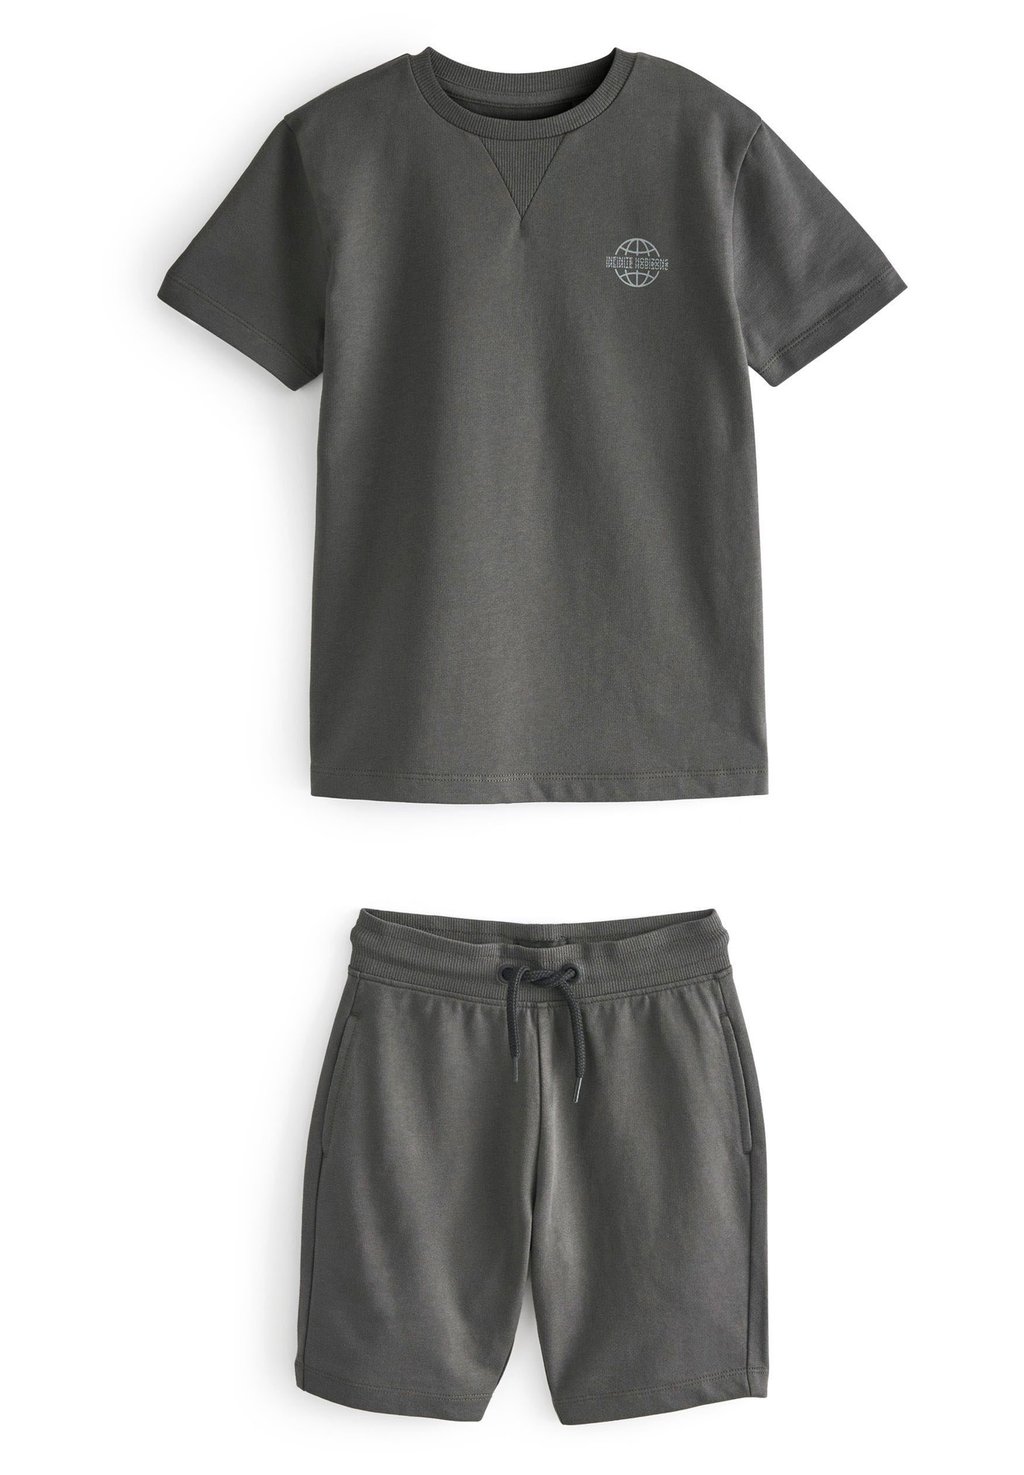 Шорты T-SHIRT AND SHORTS 2 PIECE SET Next, цвет charcoal grey шорты all over printed t shirt and shorts license set next цвет neutral tan mickey mouse